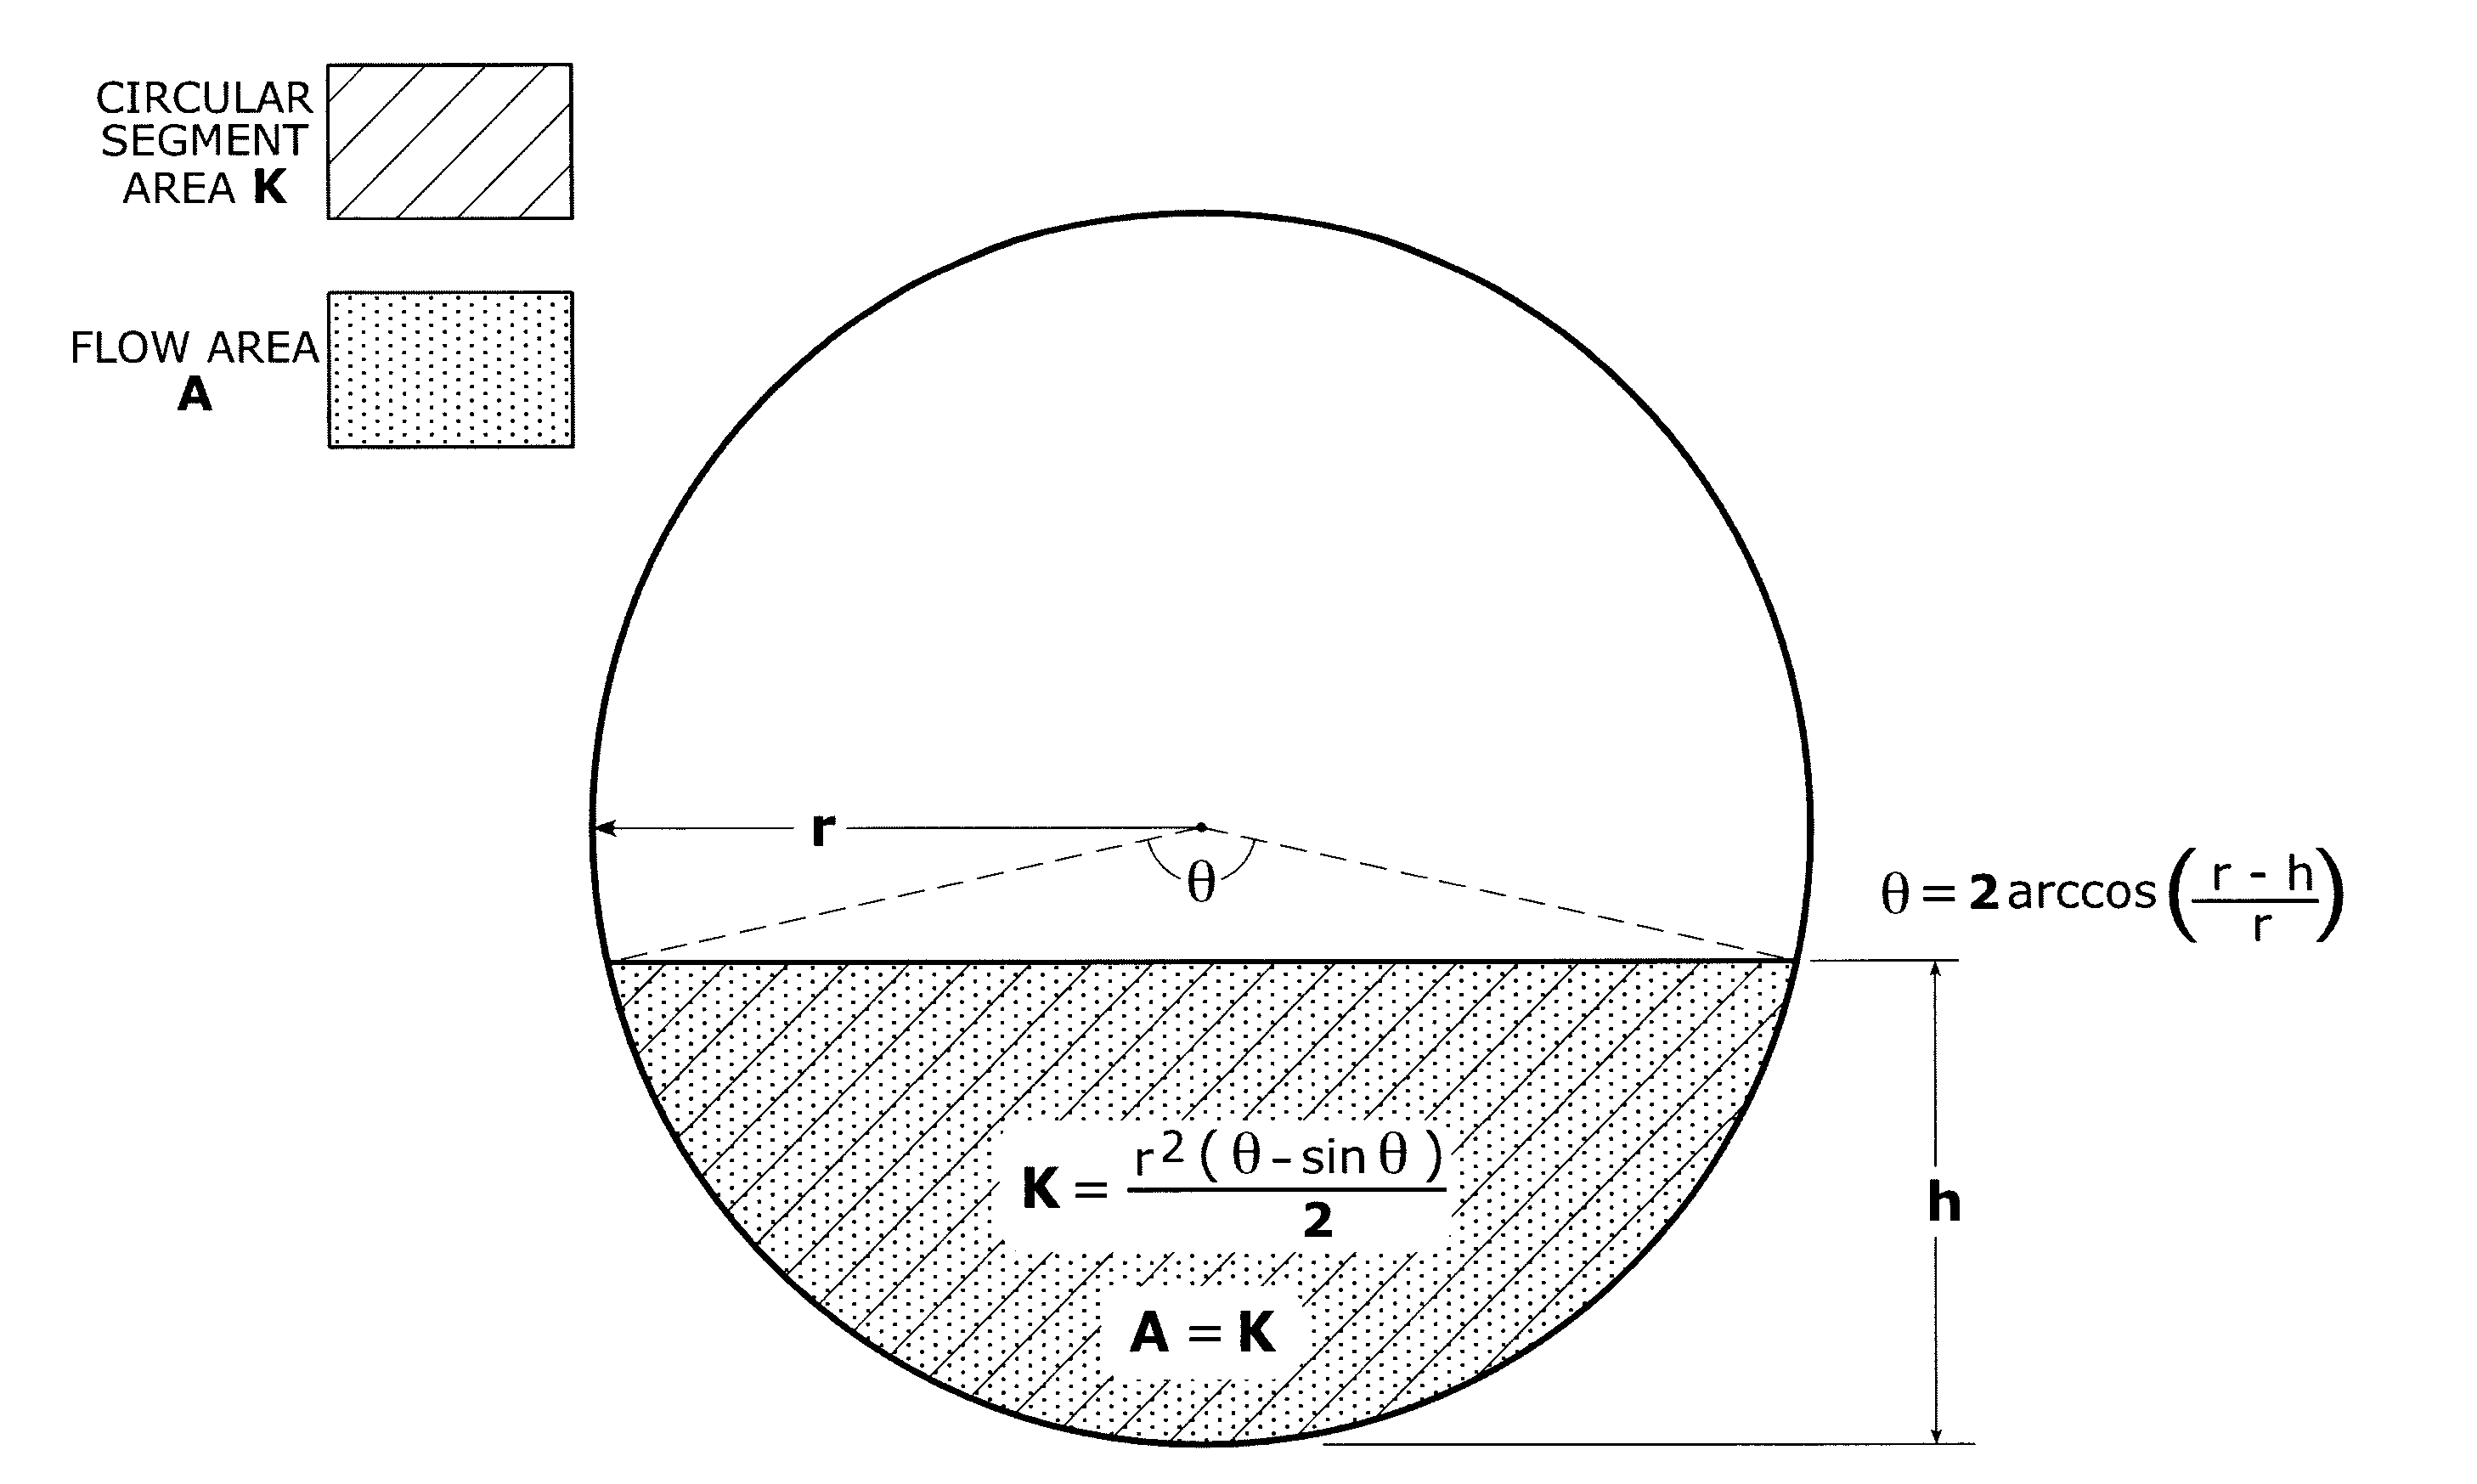 Method of wastewater flow measurement, system analysis, and improvement